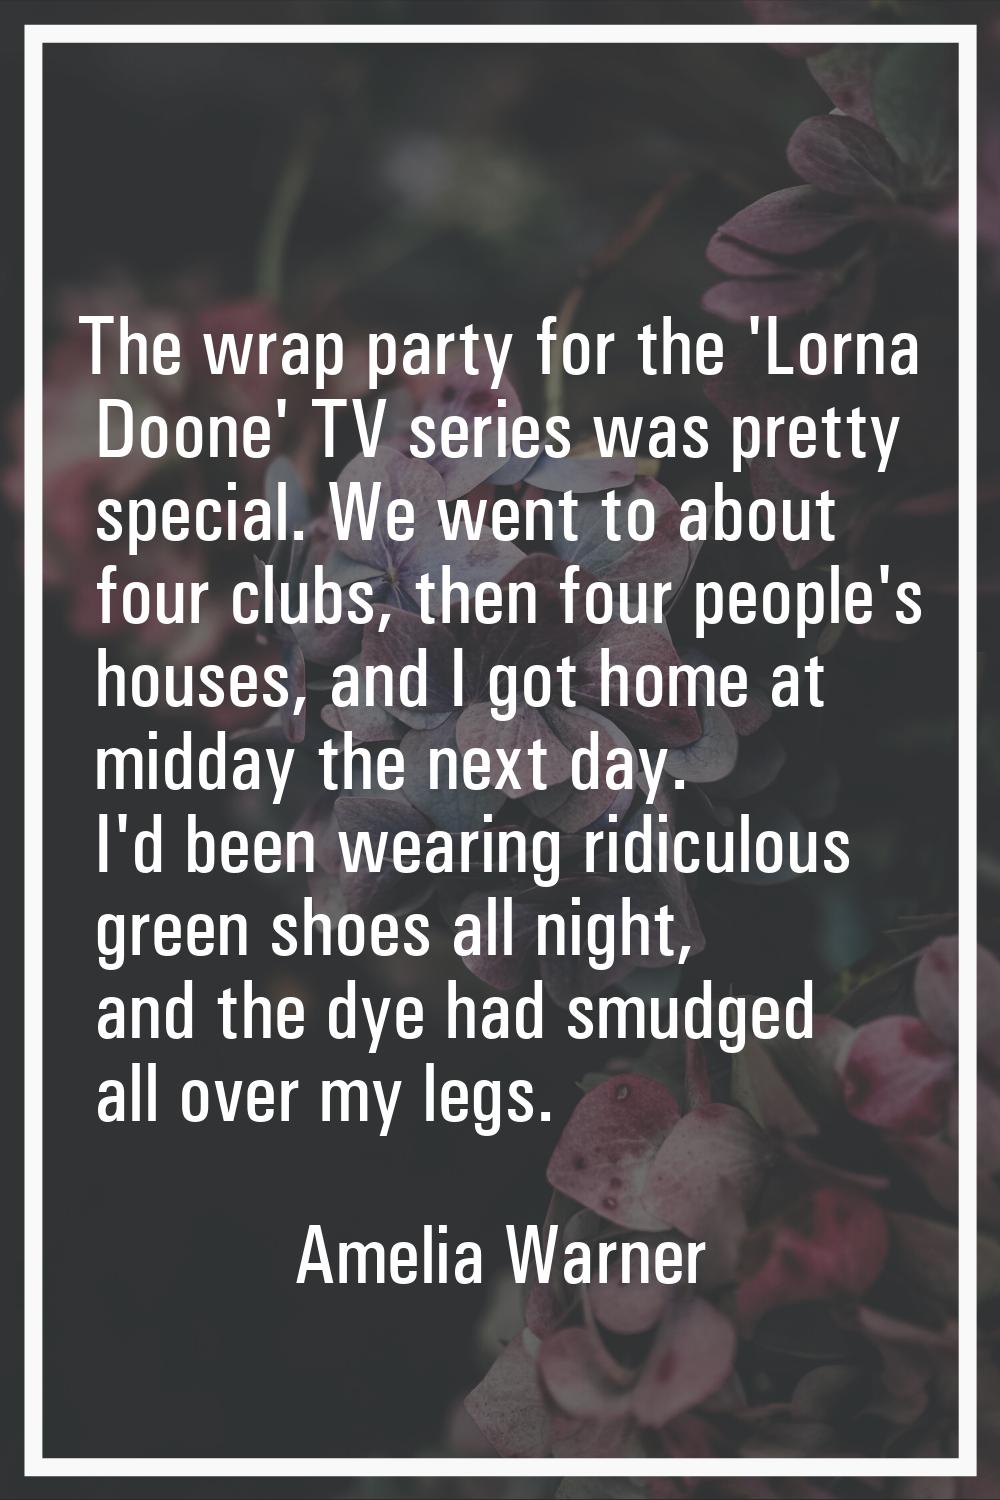 The wrap party for the 'Lorna Doone' TV series was pretty special. We went to about four clubs, the